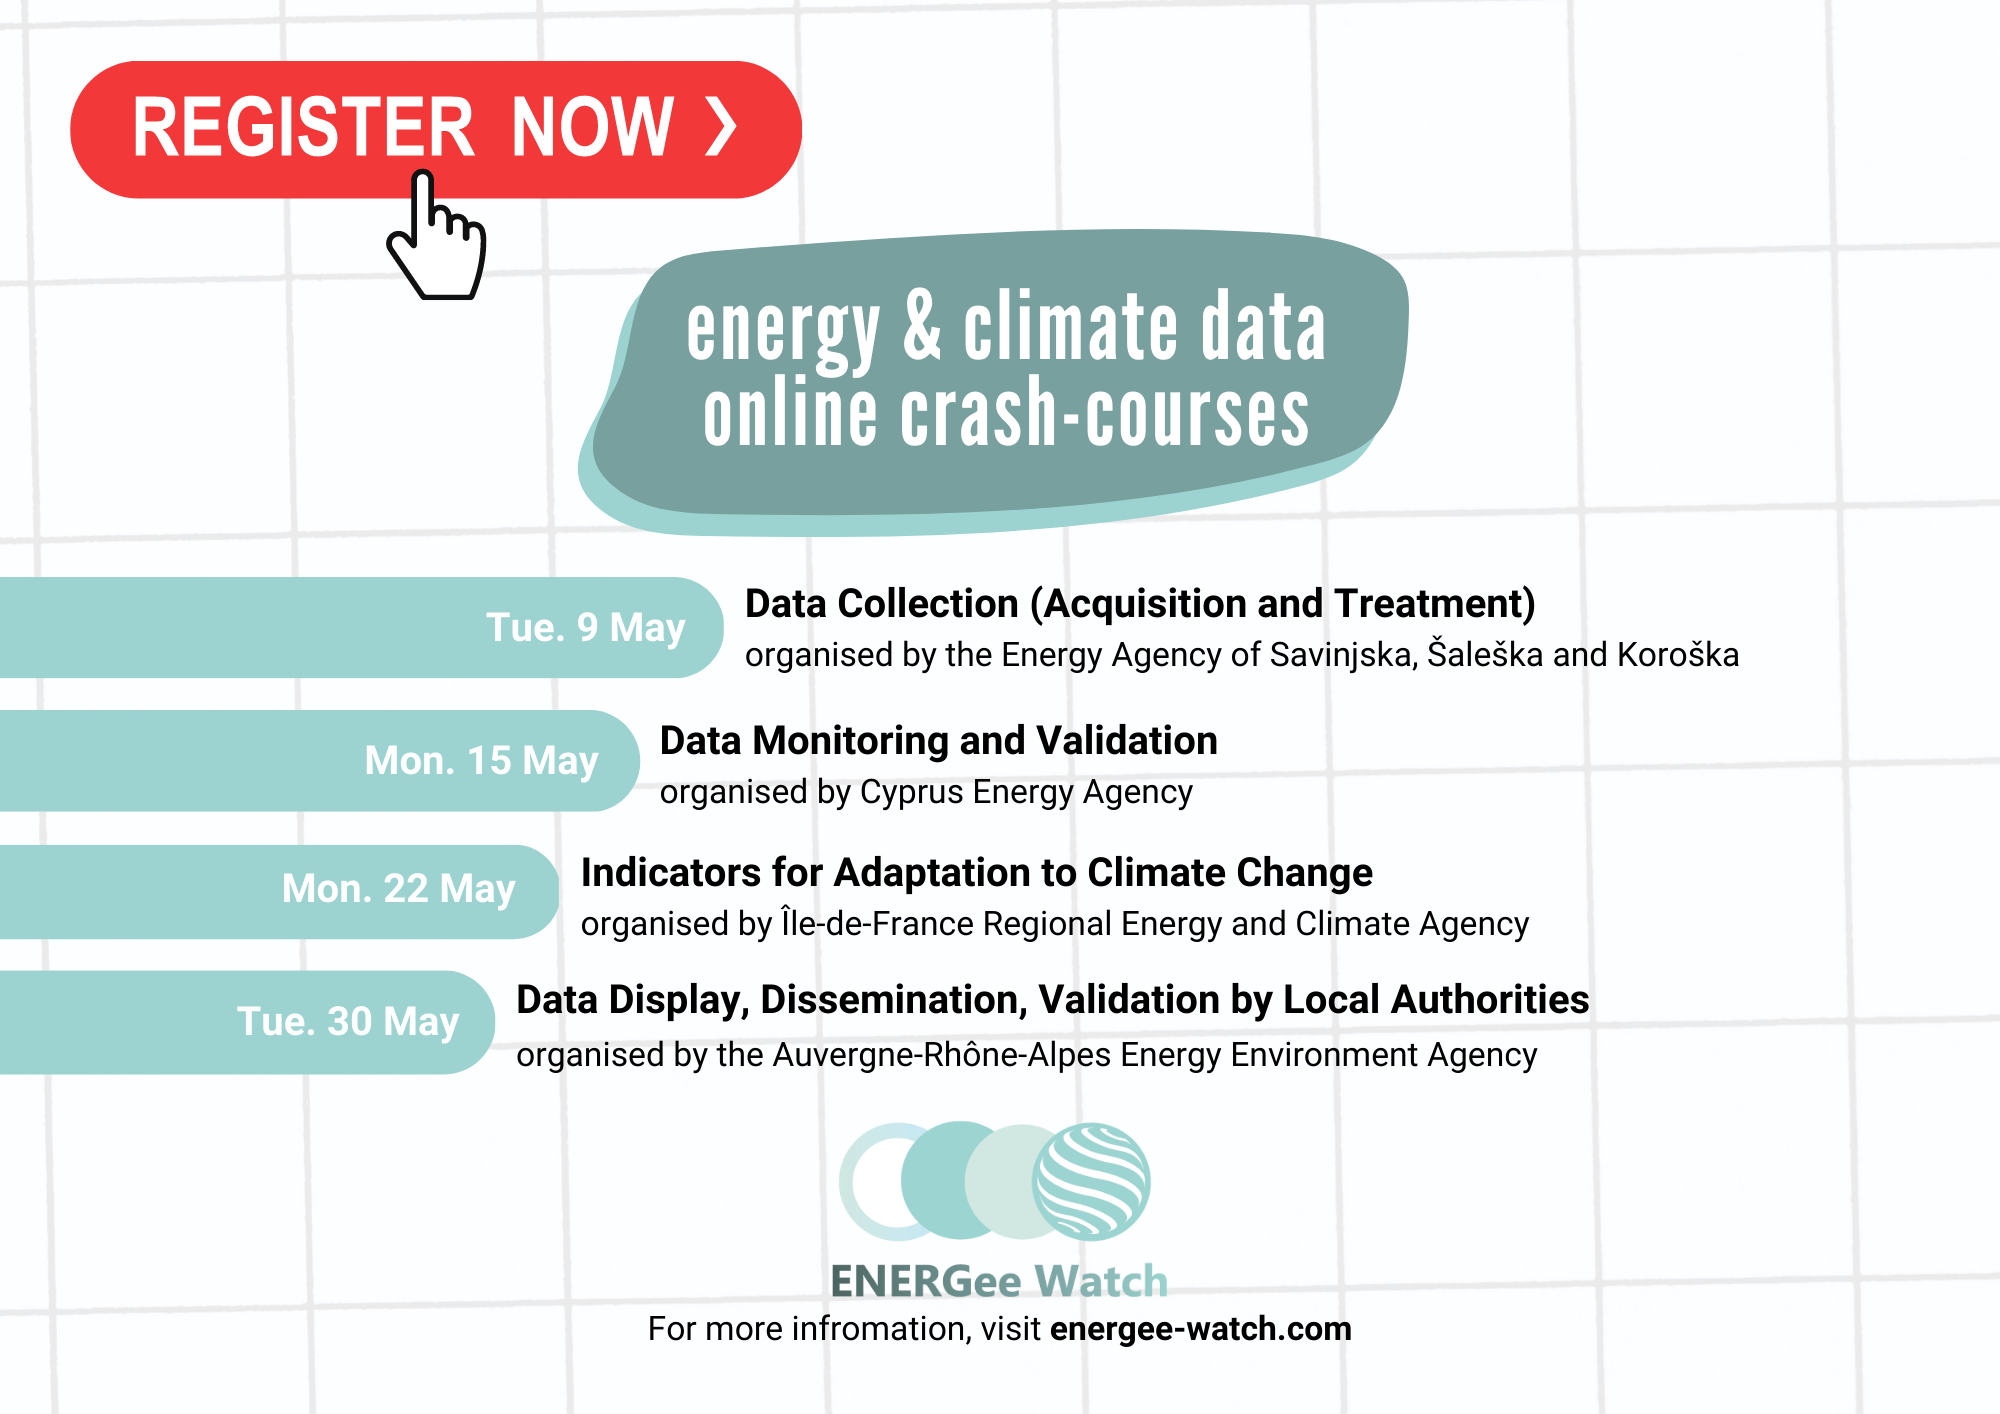 Register for the ENERGee Watch crash-courses in May!